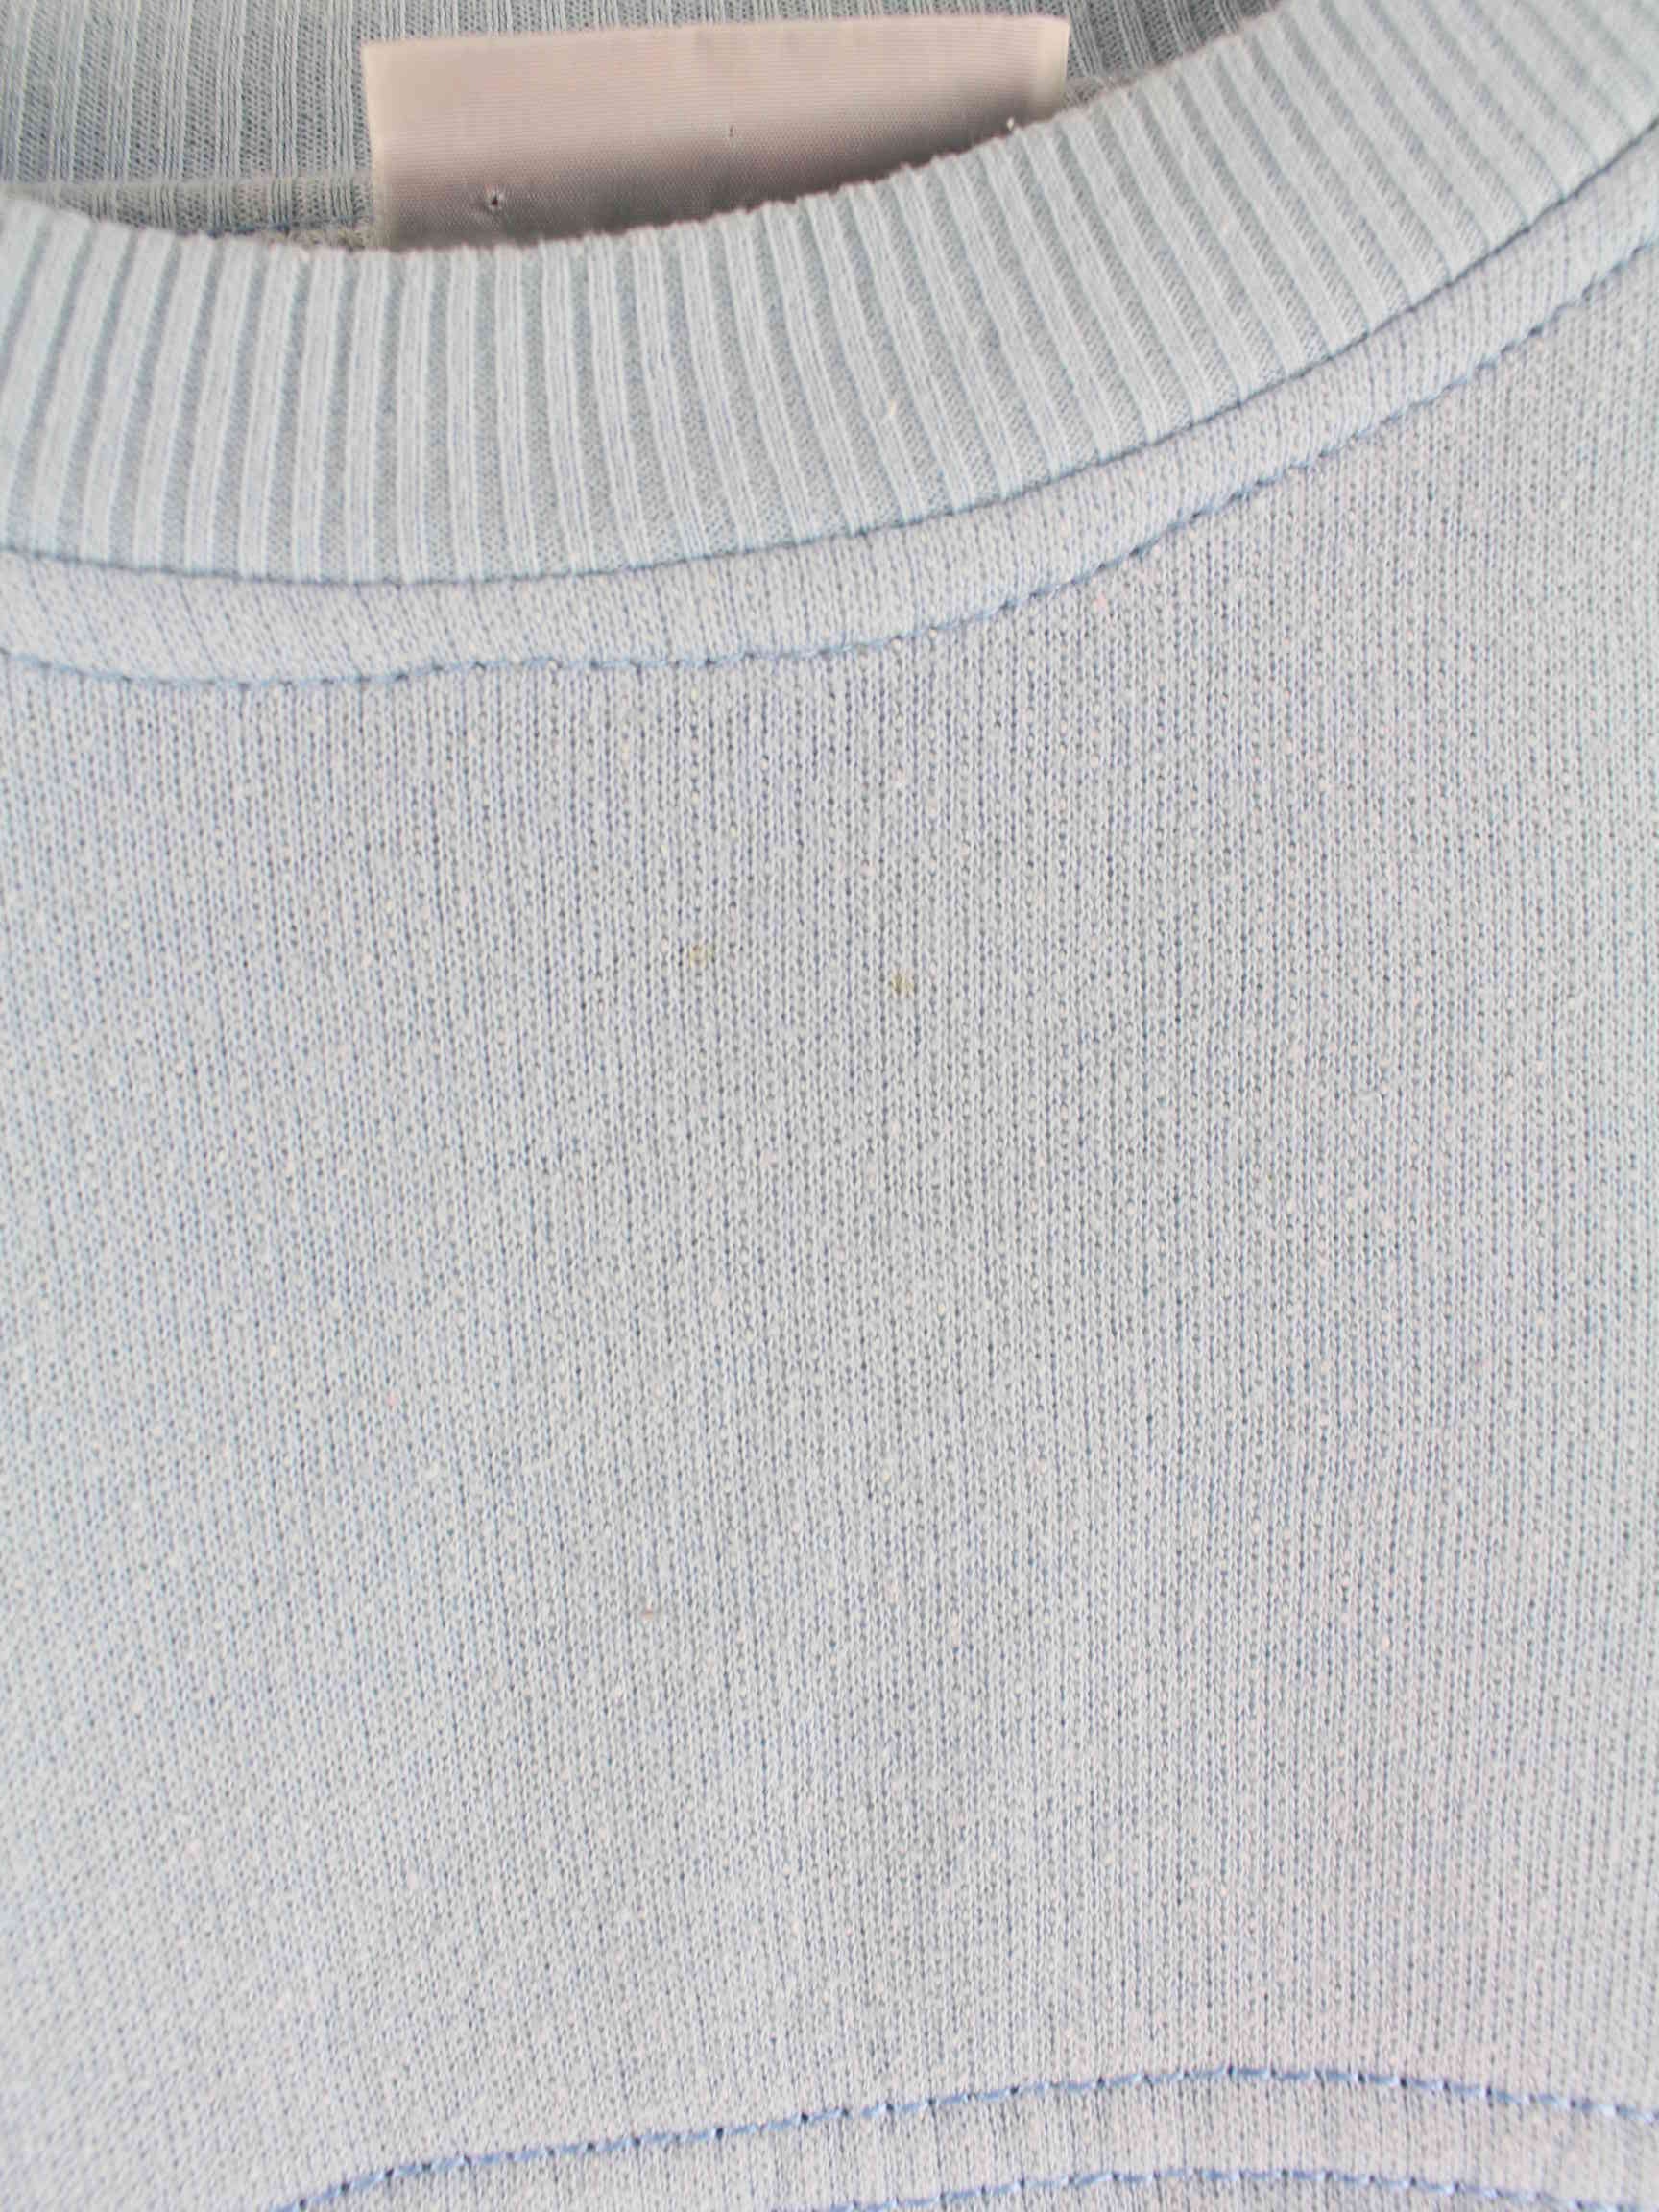 Lacoste 90s Vintage Embroidered Sweater Blau M (detail image 3)